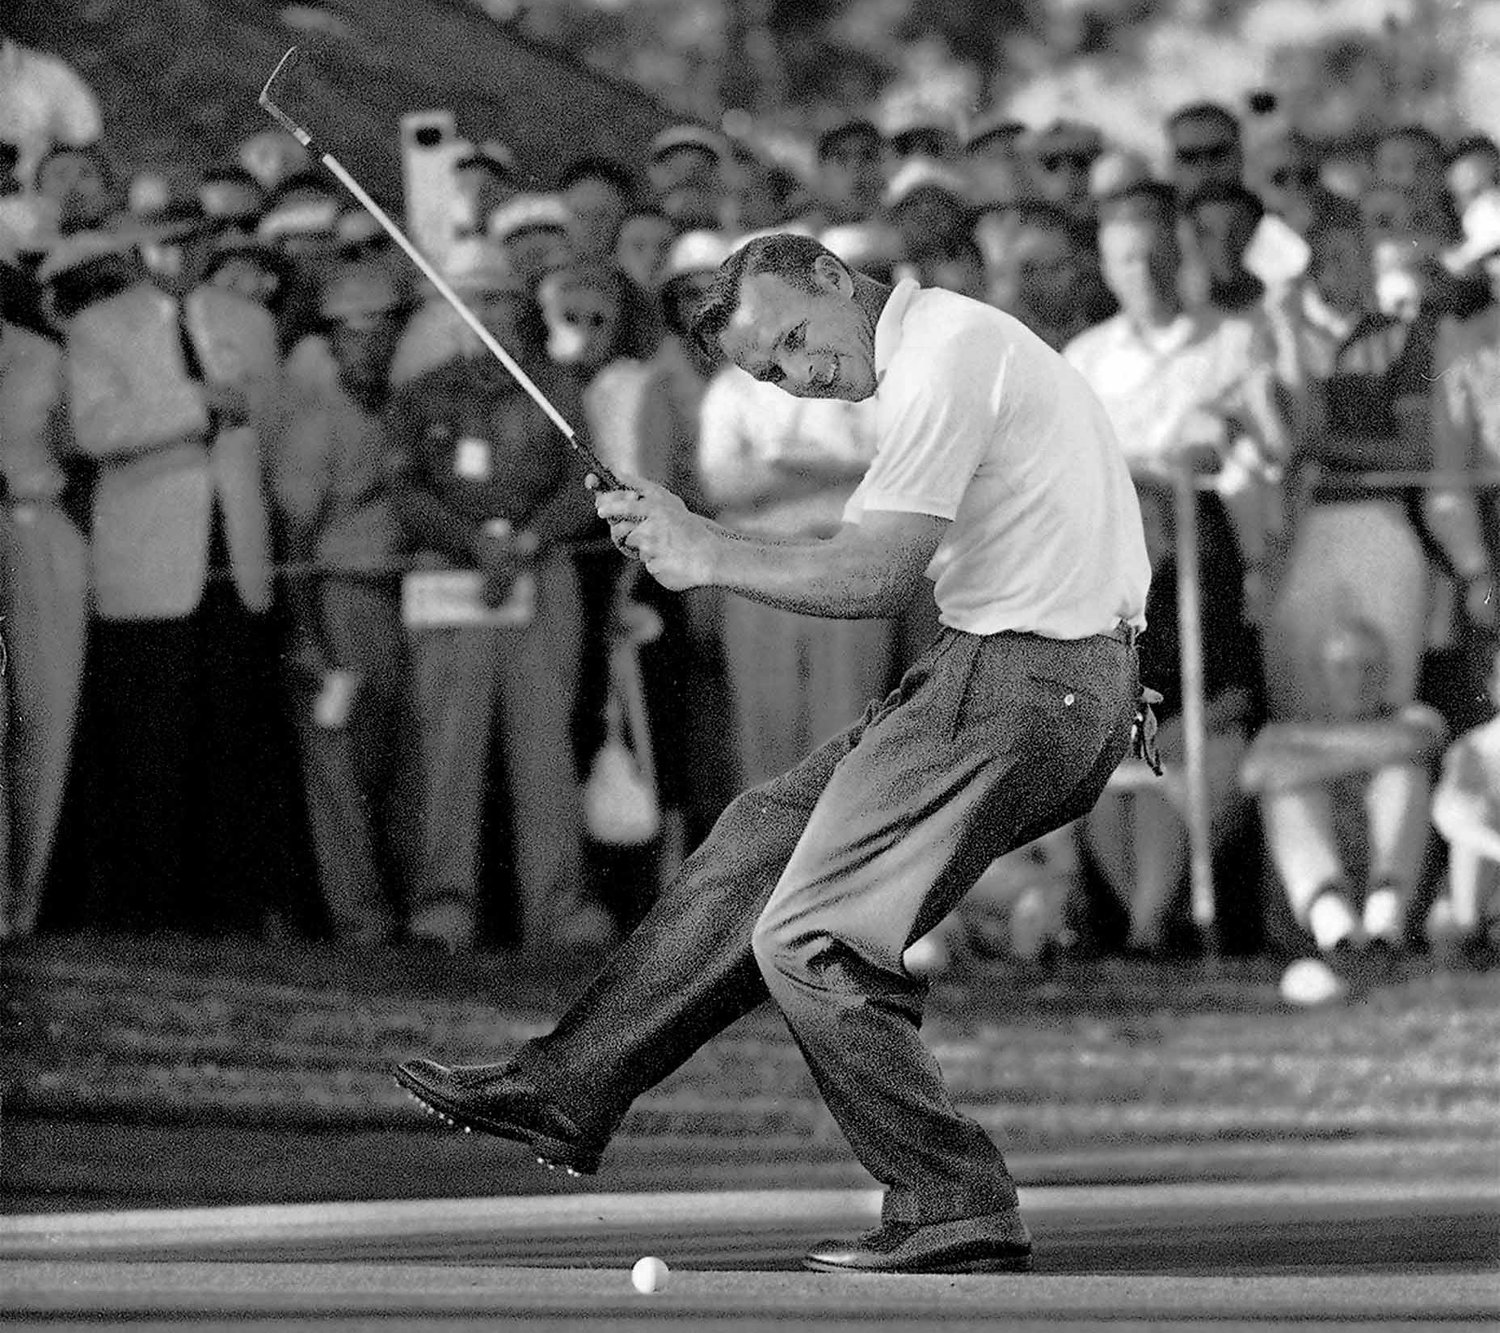 Arnold Palmer celebrating his victory at the 1960 U.S. Open where he delivered the greatest comeback in tournament history. Opening a new generational era in golf, the event also witnessed the arrival of Jack Nicklaus and the exit of Ben Hogan.